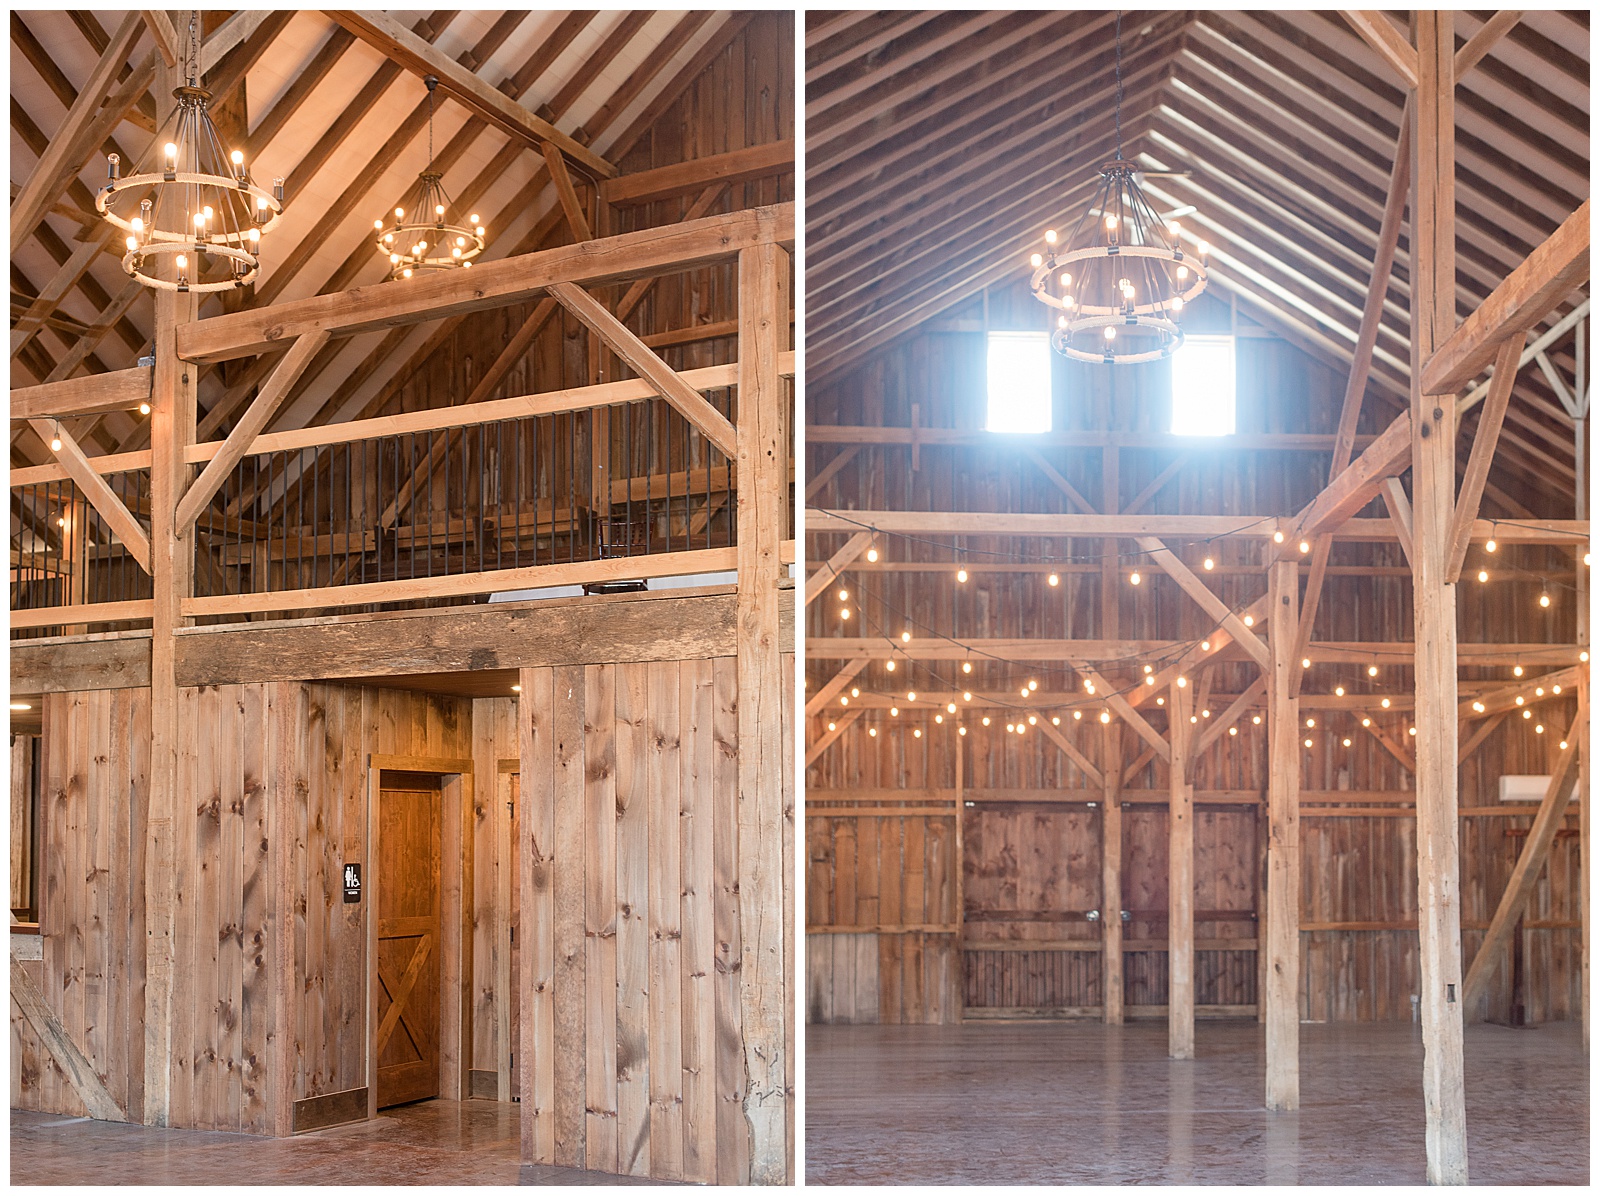 interior photo of barn with lots of exposed wooden beams and beautiful chandeliers hanging from ceiling and a wooden wall leading to the bathrooms of the reception venue at The Barn at Stoneybrooke in Atglen, PA, interior photo of reception area in large barn with lots of exposed wooden beams and strings of lights hanging from rafters and beautiful chandelier hanging from ceiling at The Barn at Stoneybrooke in Atglen, PA